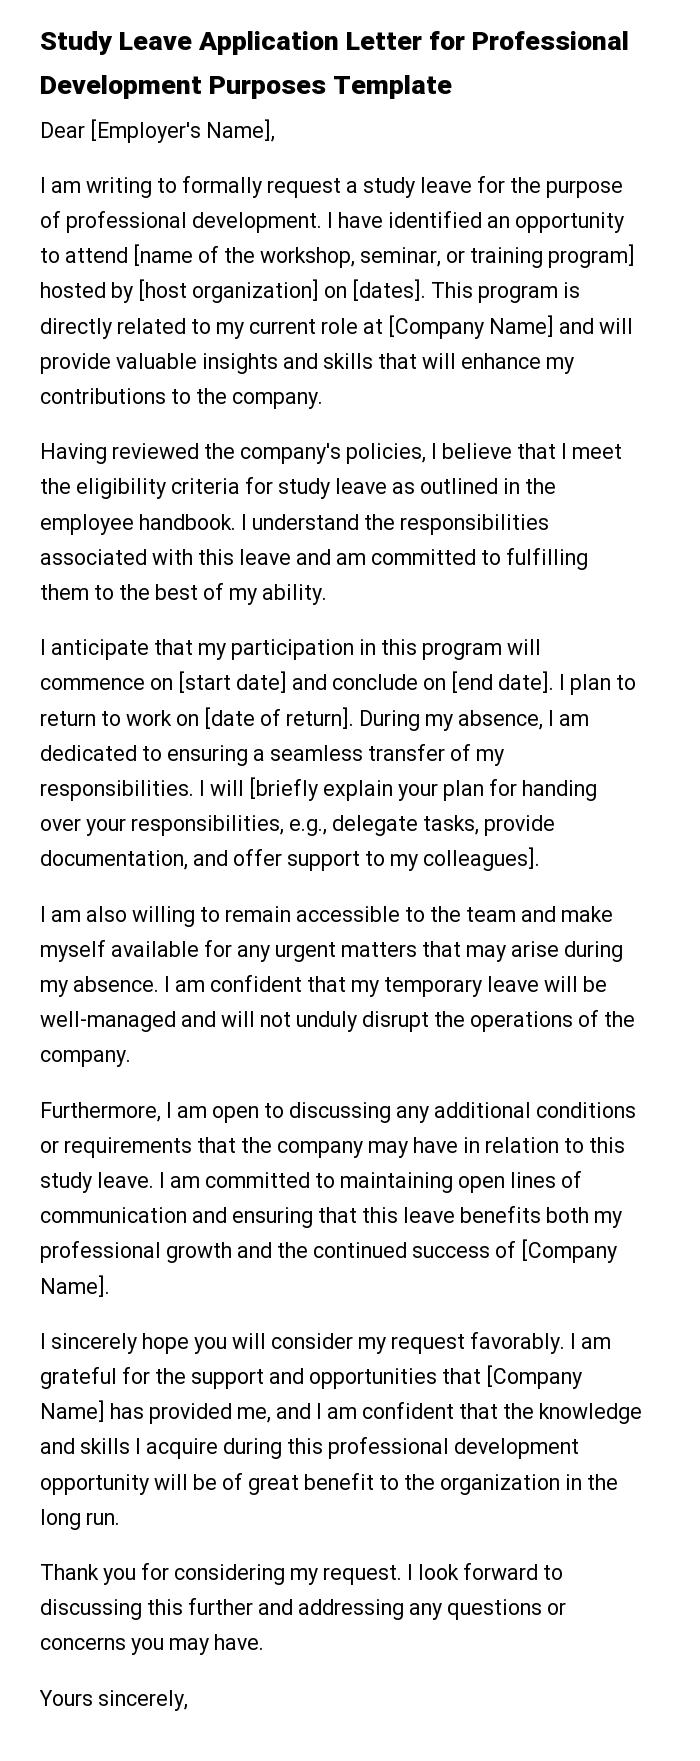 Study Leave Application Letter for Professional Development Purposes Template